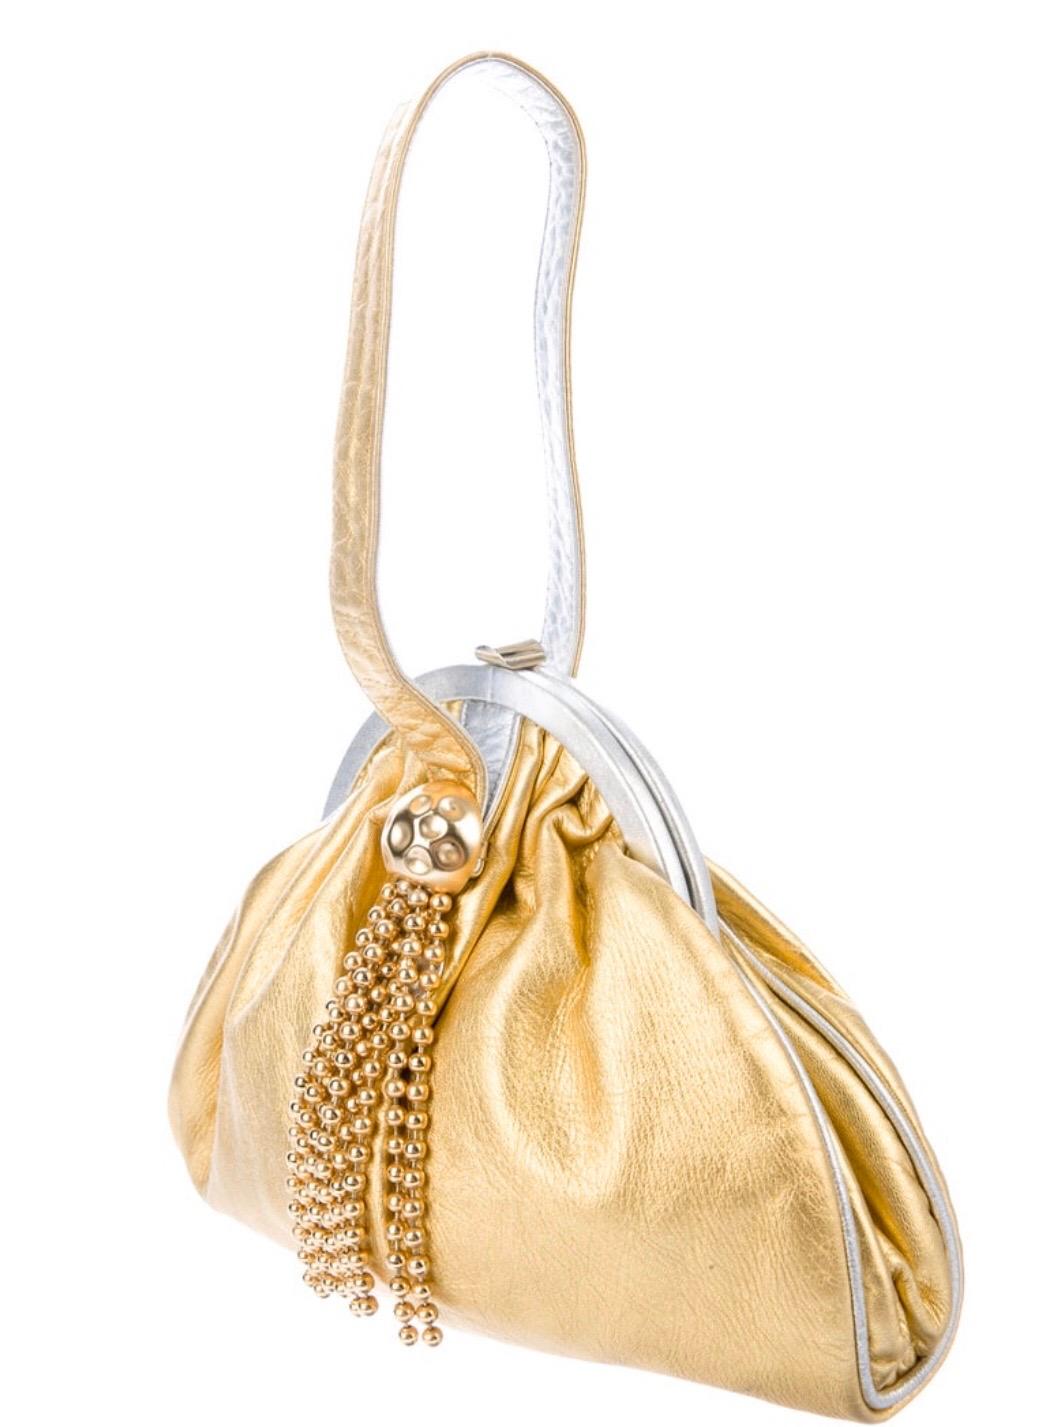 Fendi metallic gold leather evening bag with metal fringe. Silver and gold leather handle Condition: very good. 
8